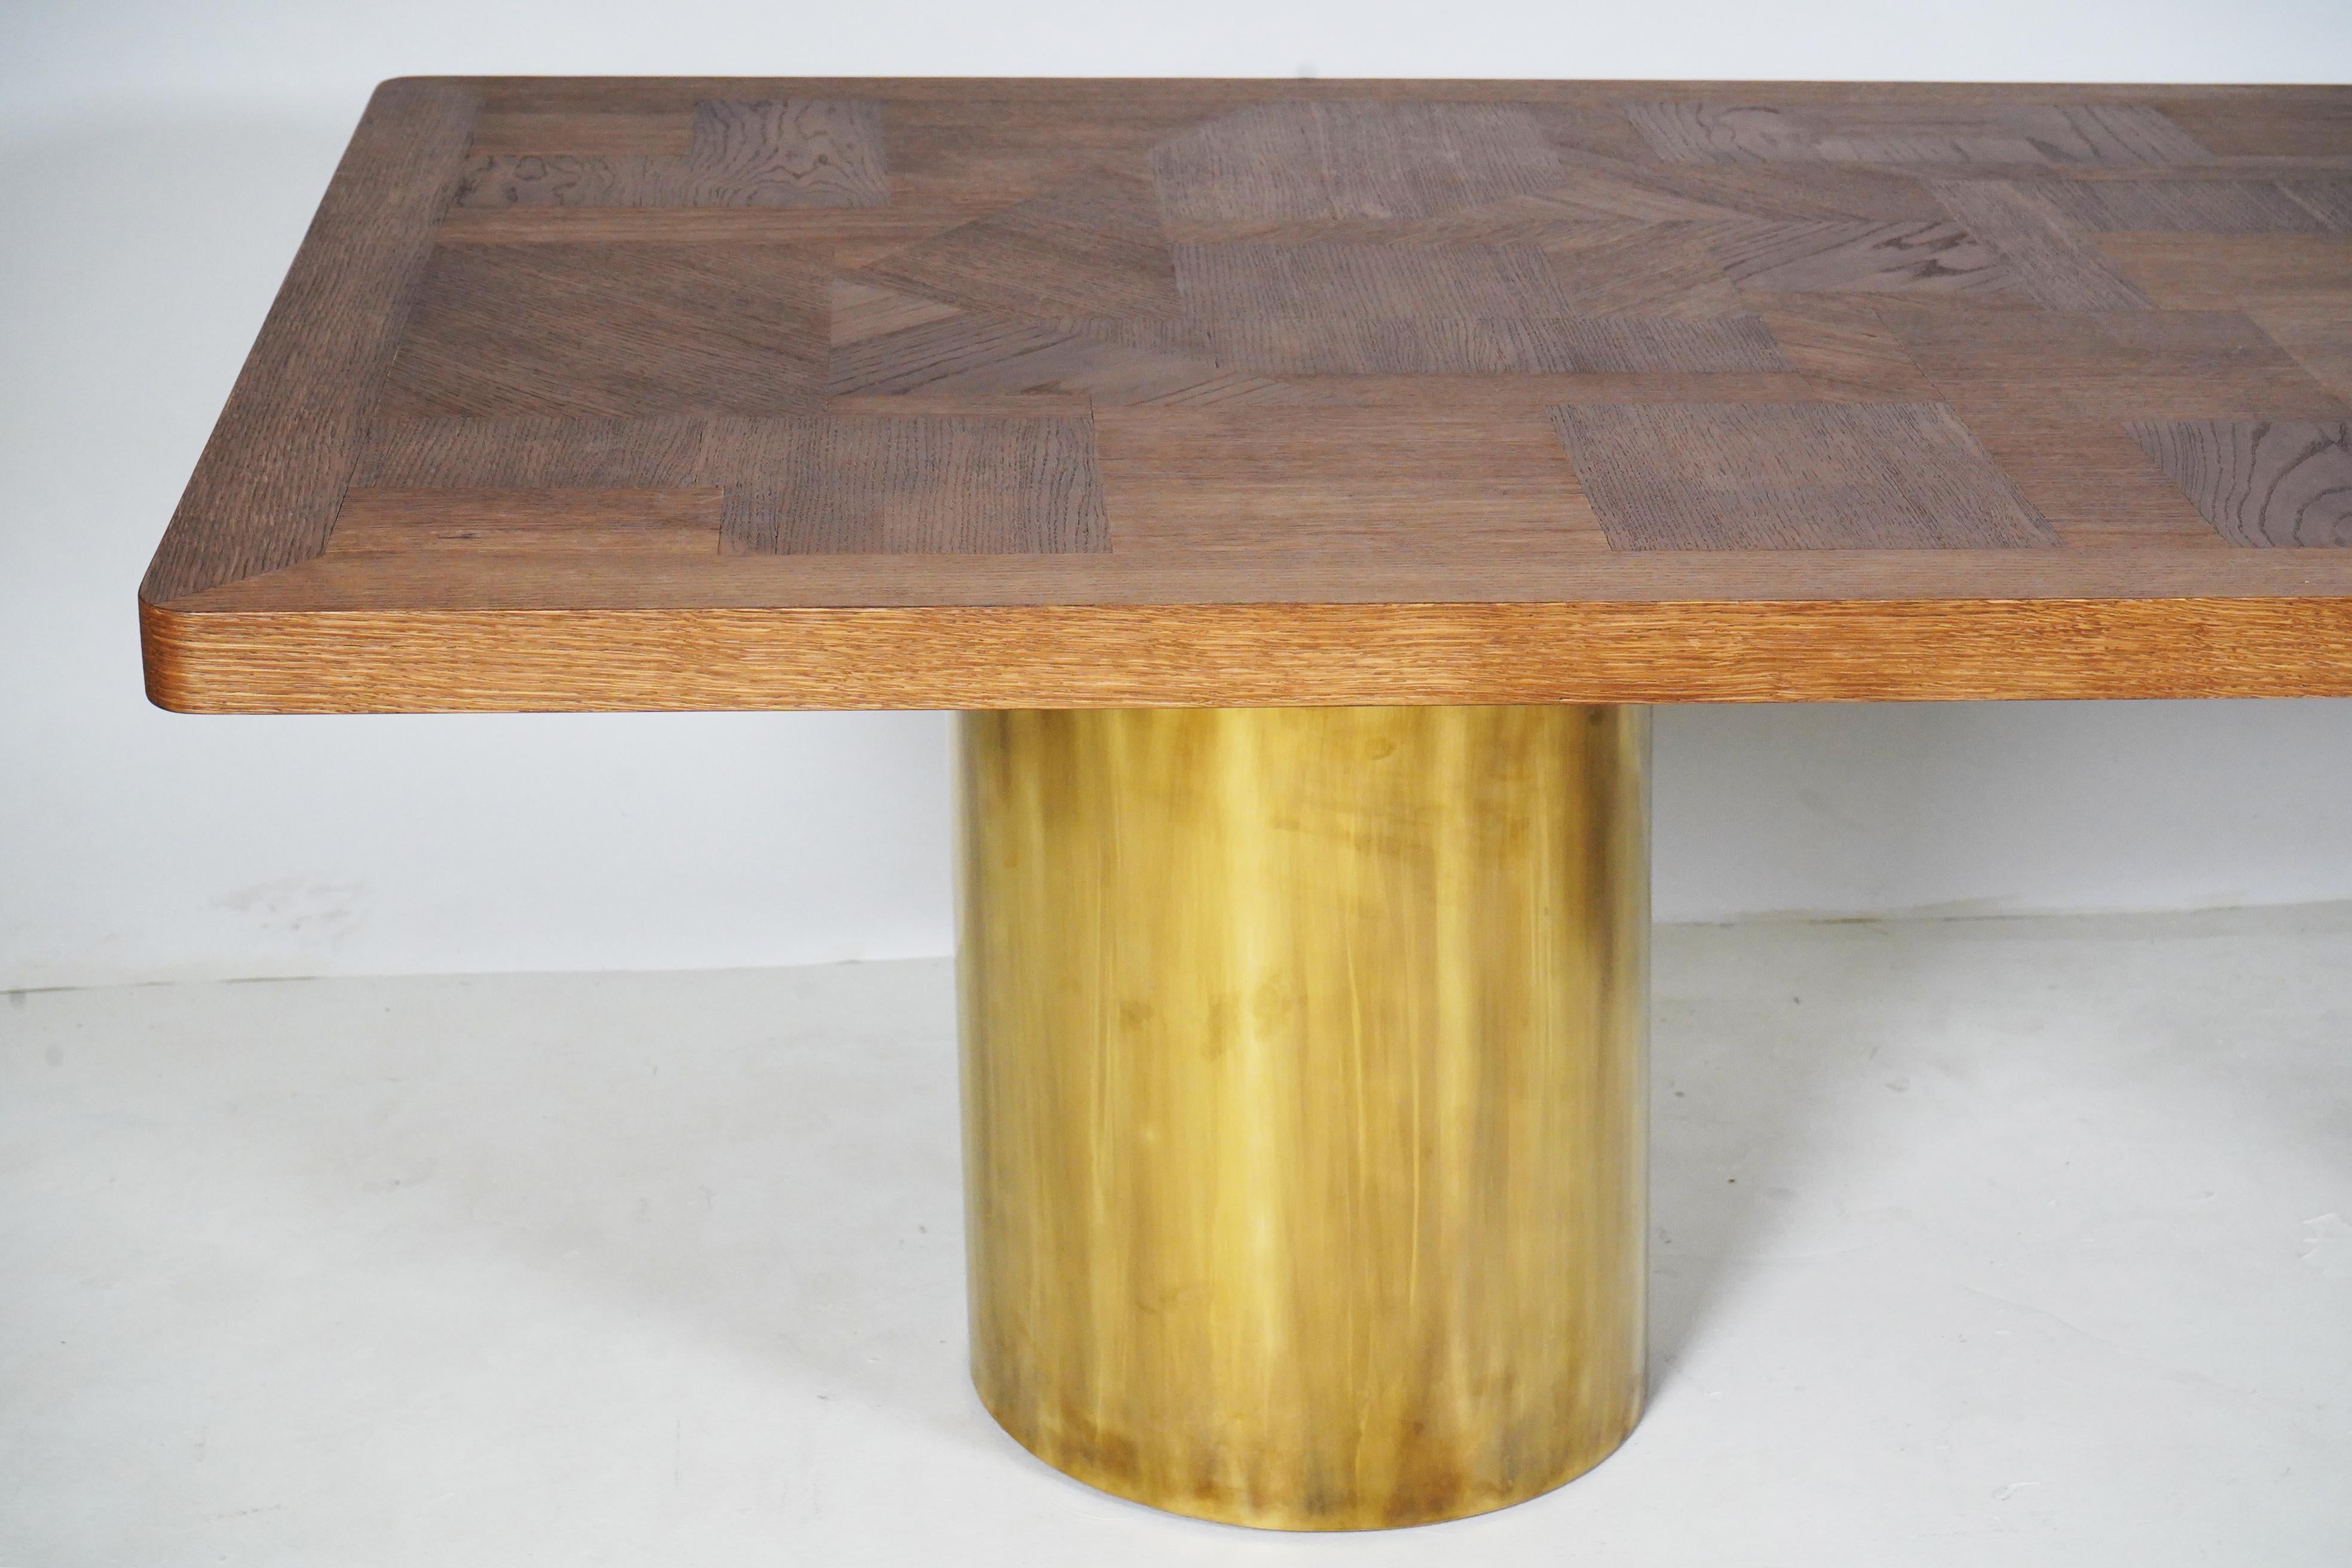 Parquetry Rectangular Dining Table with Oak Parquet Top and Brass Pedestal Legs